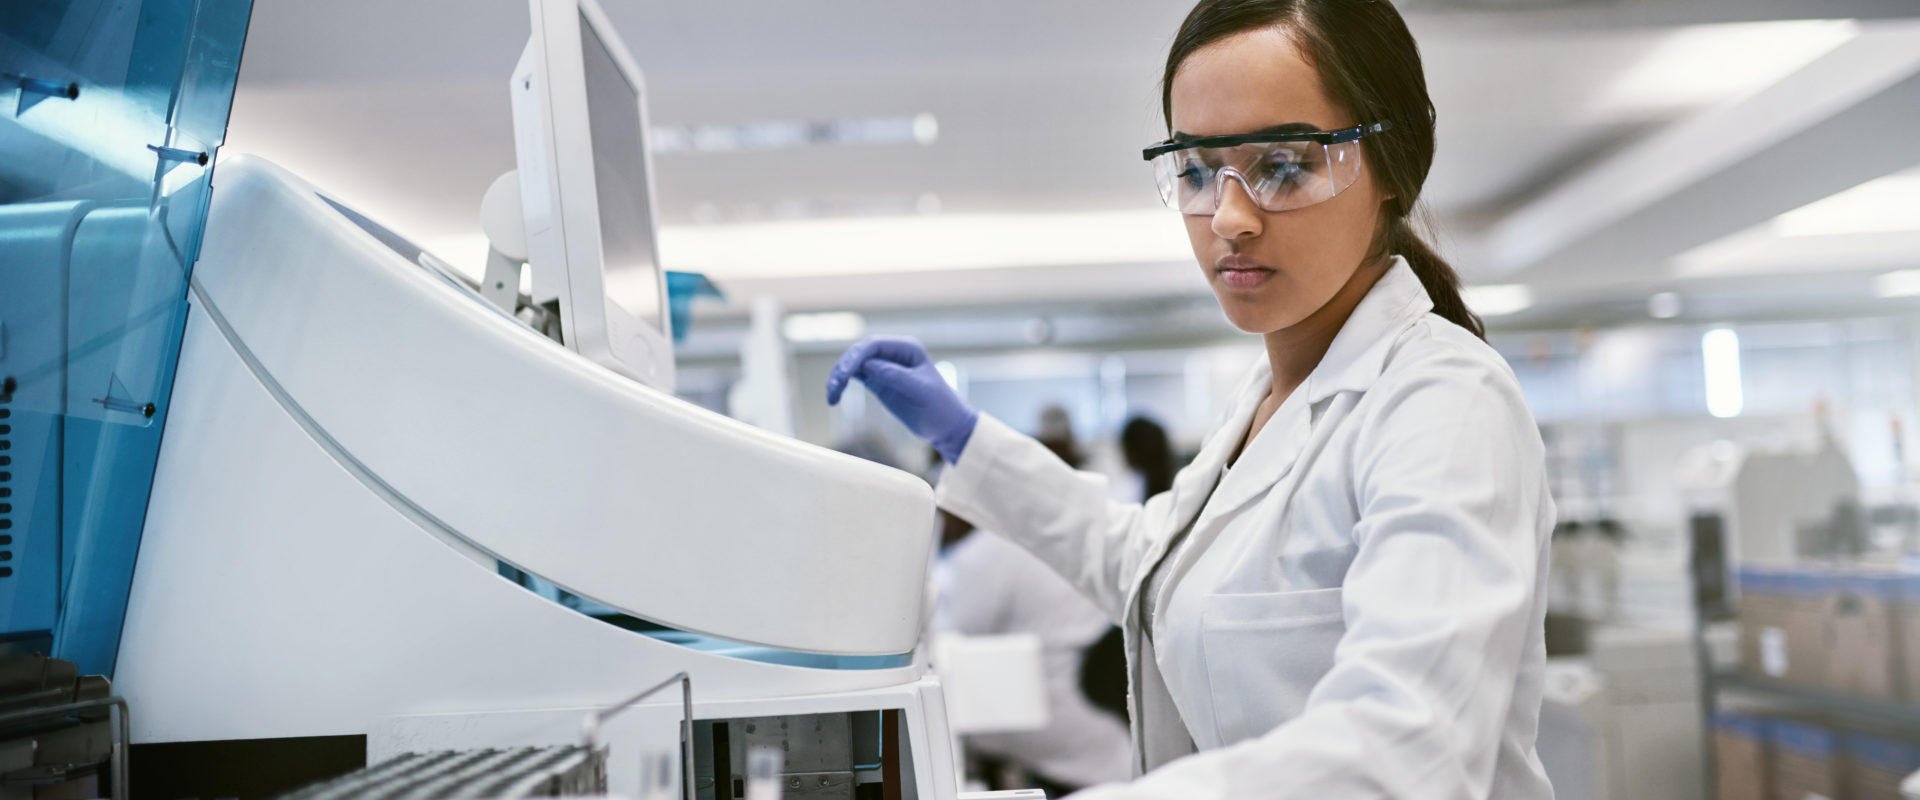 Woman in a lab coat and goggles in front of a machine